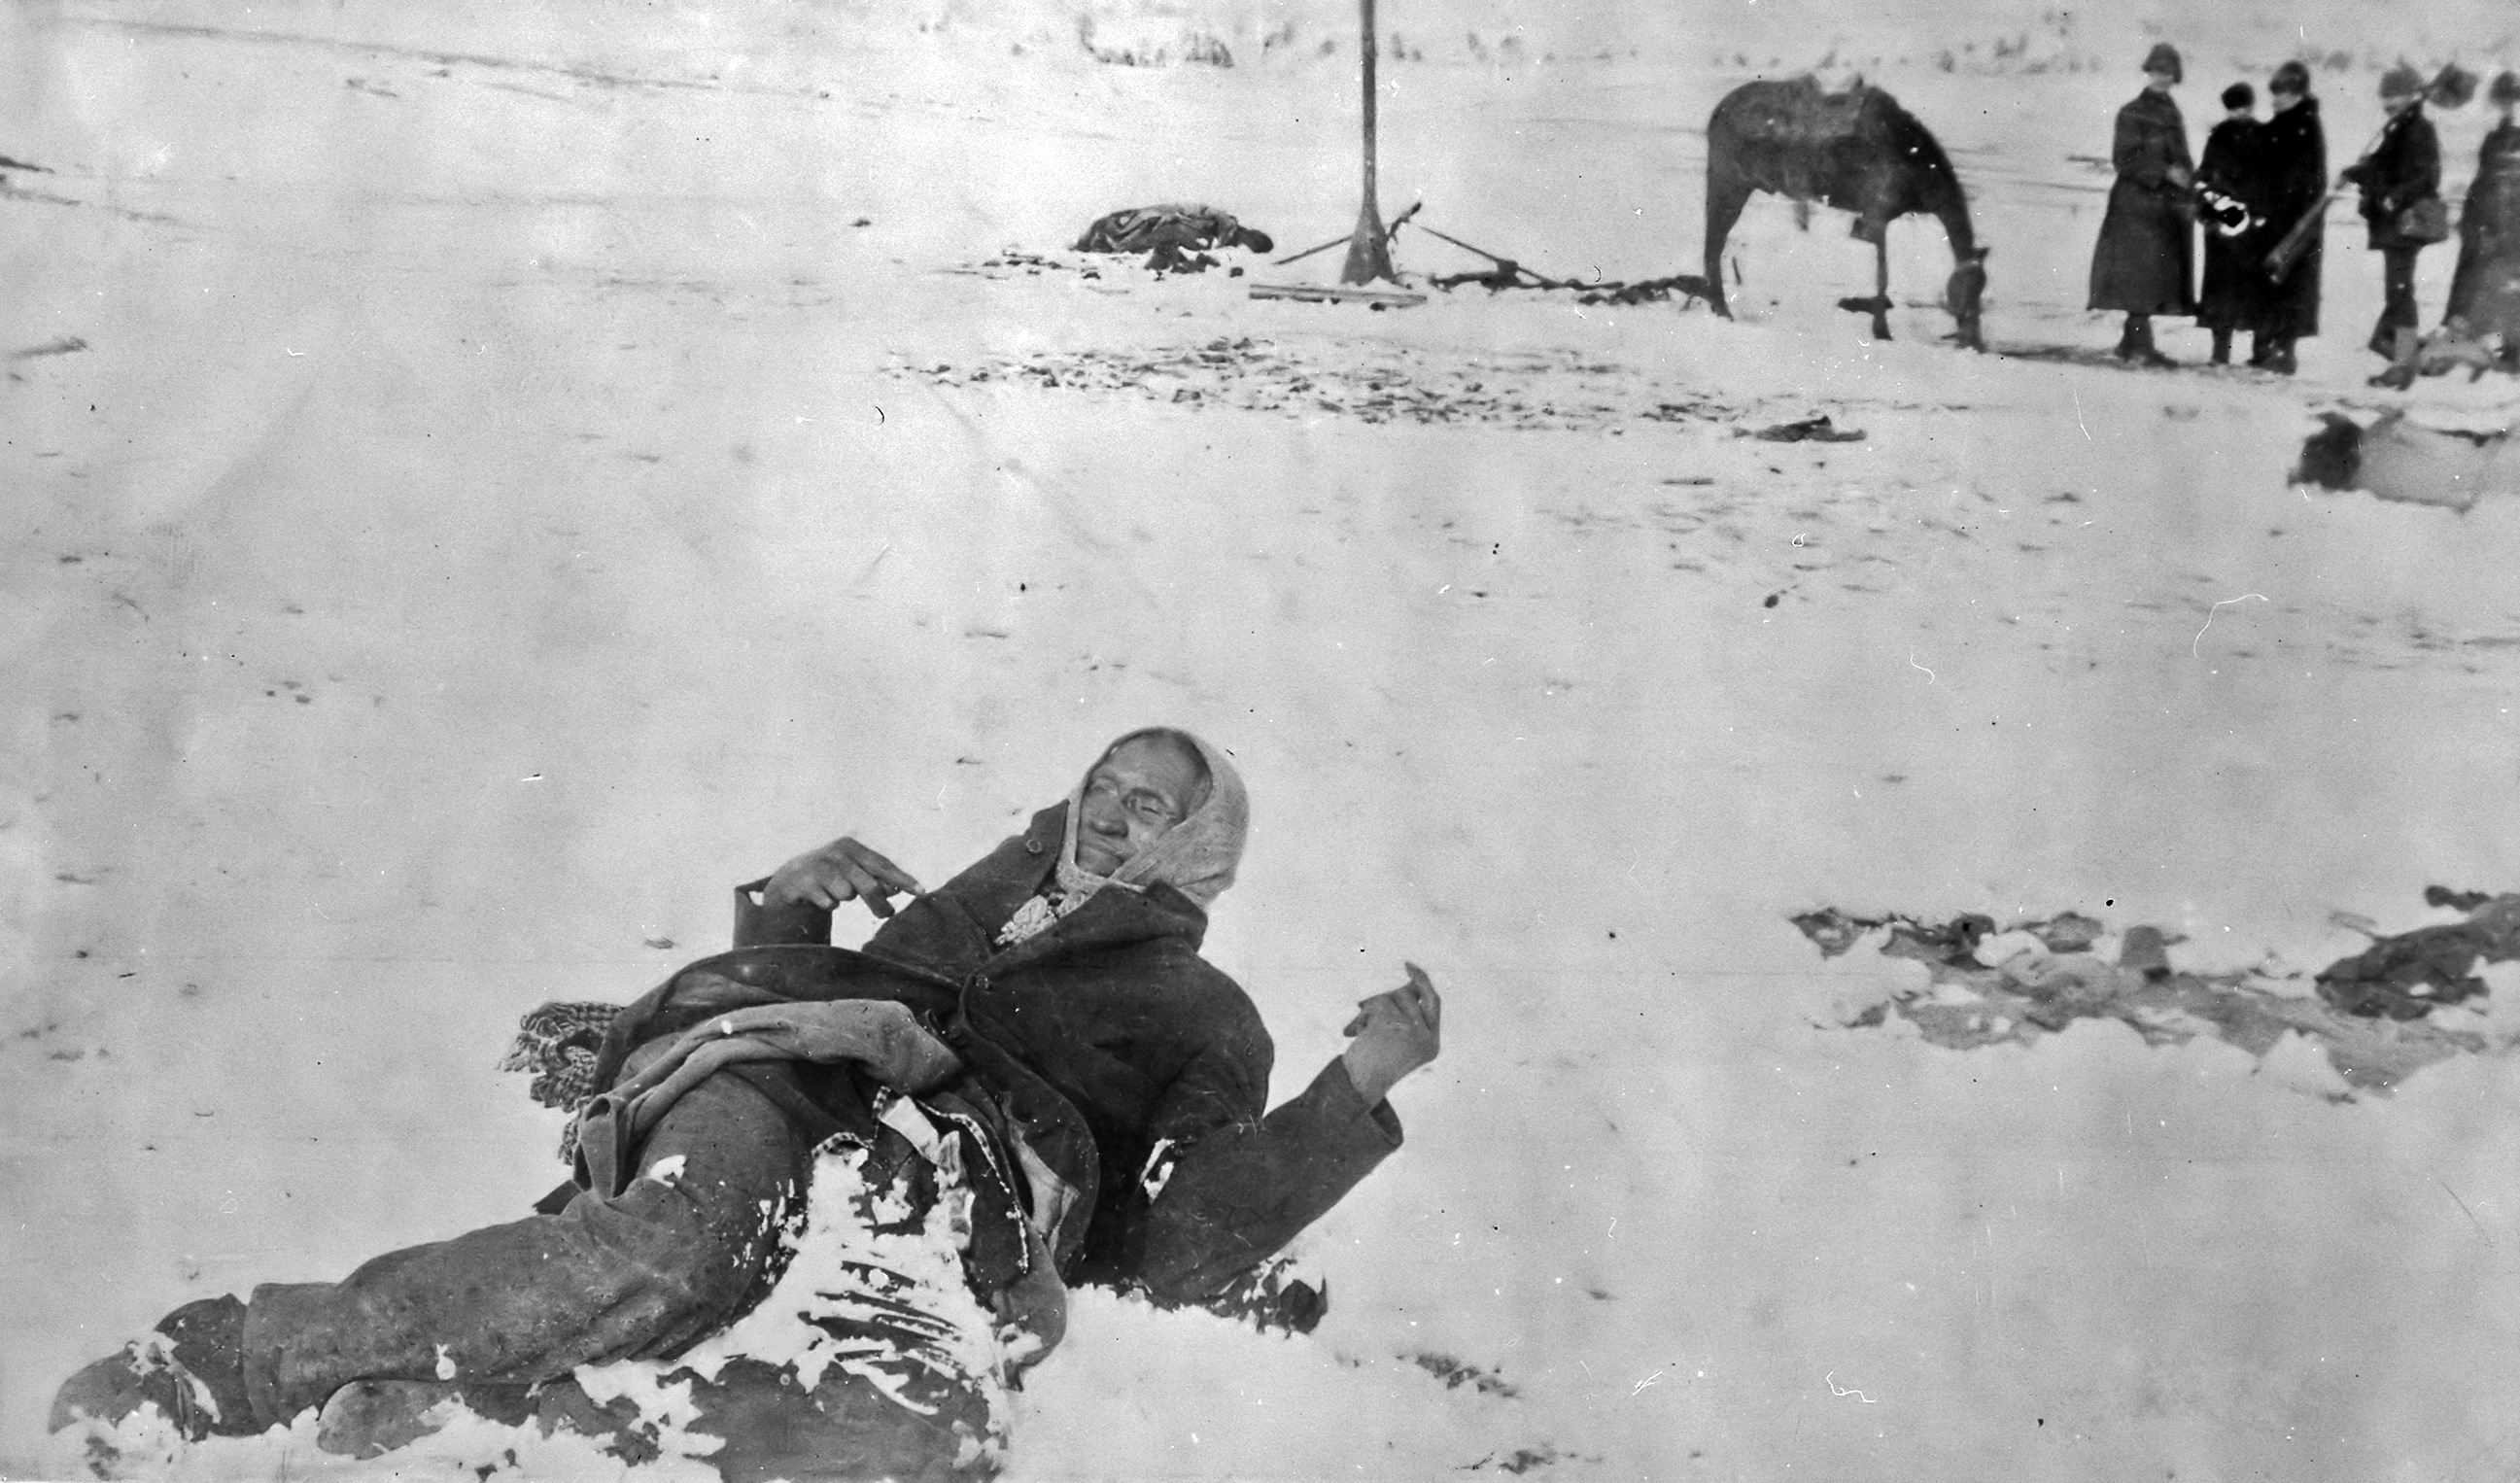 ...The soldiers did not end the fight with the warriors. They began to shoot everyone. Women, children, old, sick, unarmed, it did not matter. They massacred as many as they could. Here lies the body of Chief Spotted Elk, who was gunned down apparently trying to stop the fighting. He was unarmed. After it was over, some 90 warriors were killed, but also around 200 women and children were killed as well. They then dumped most of the bodies in mass graves like the one in the previous picture. This was one of the major events in the very ugly history of the US when it comes to their handling of Native American Indians.